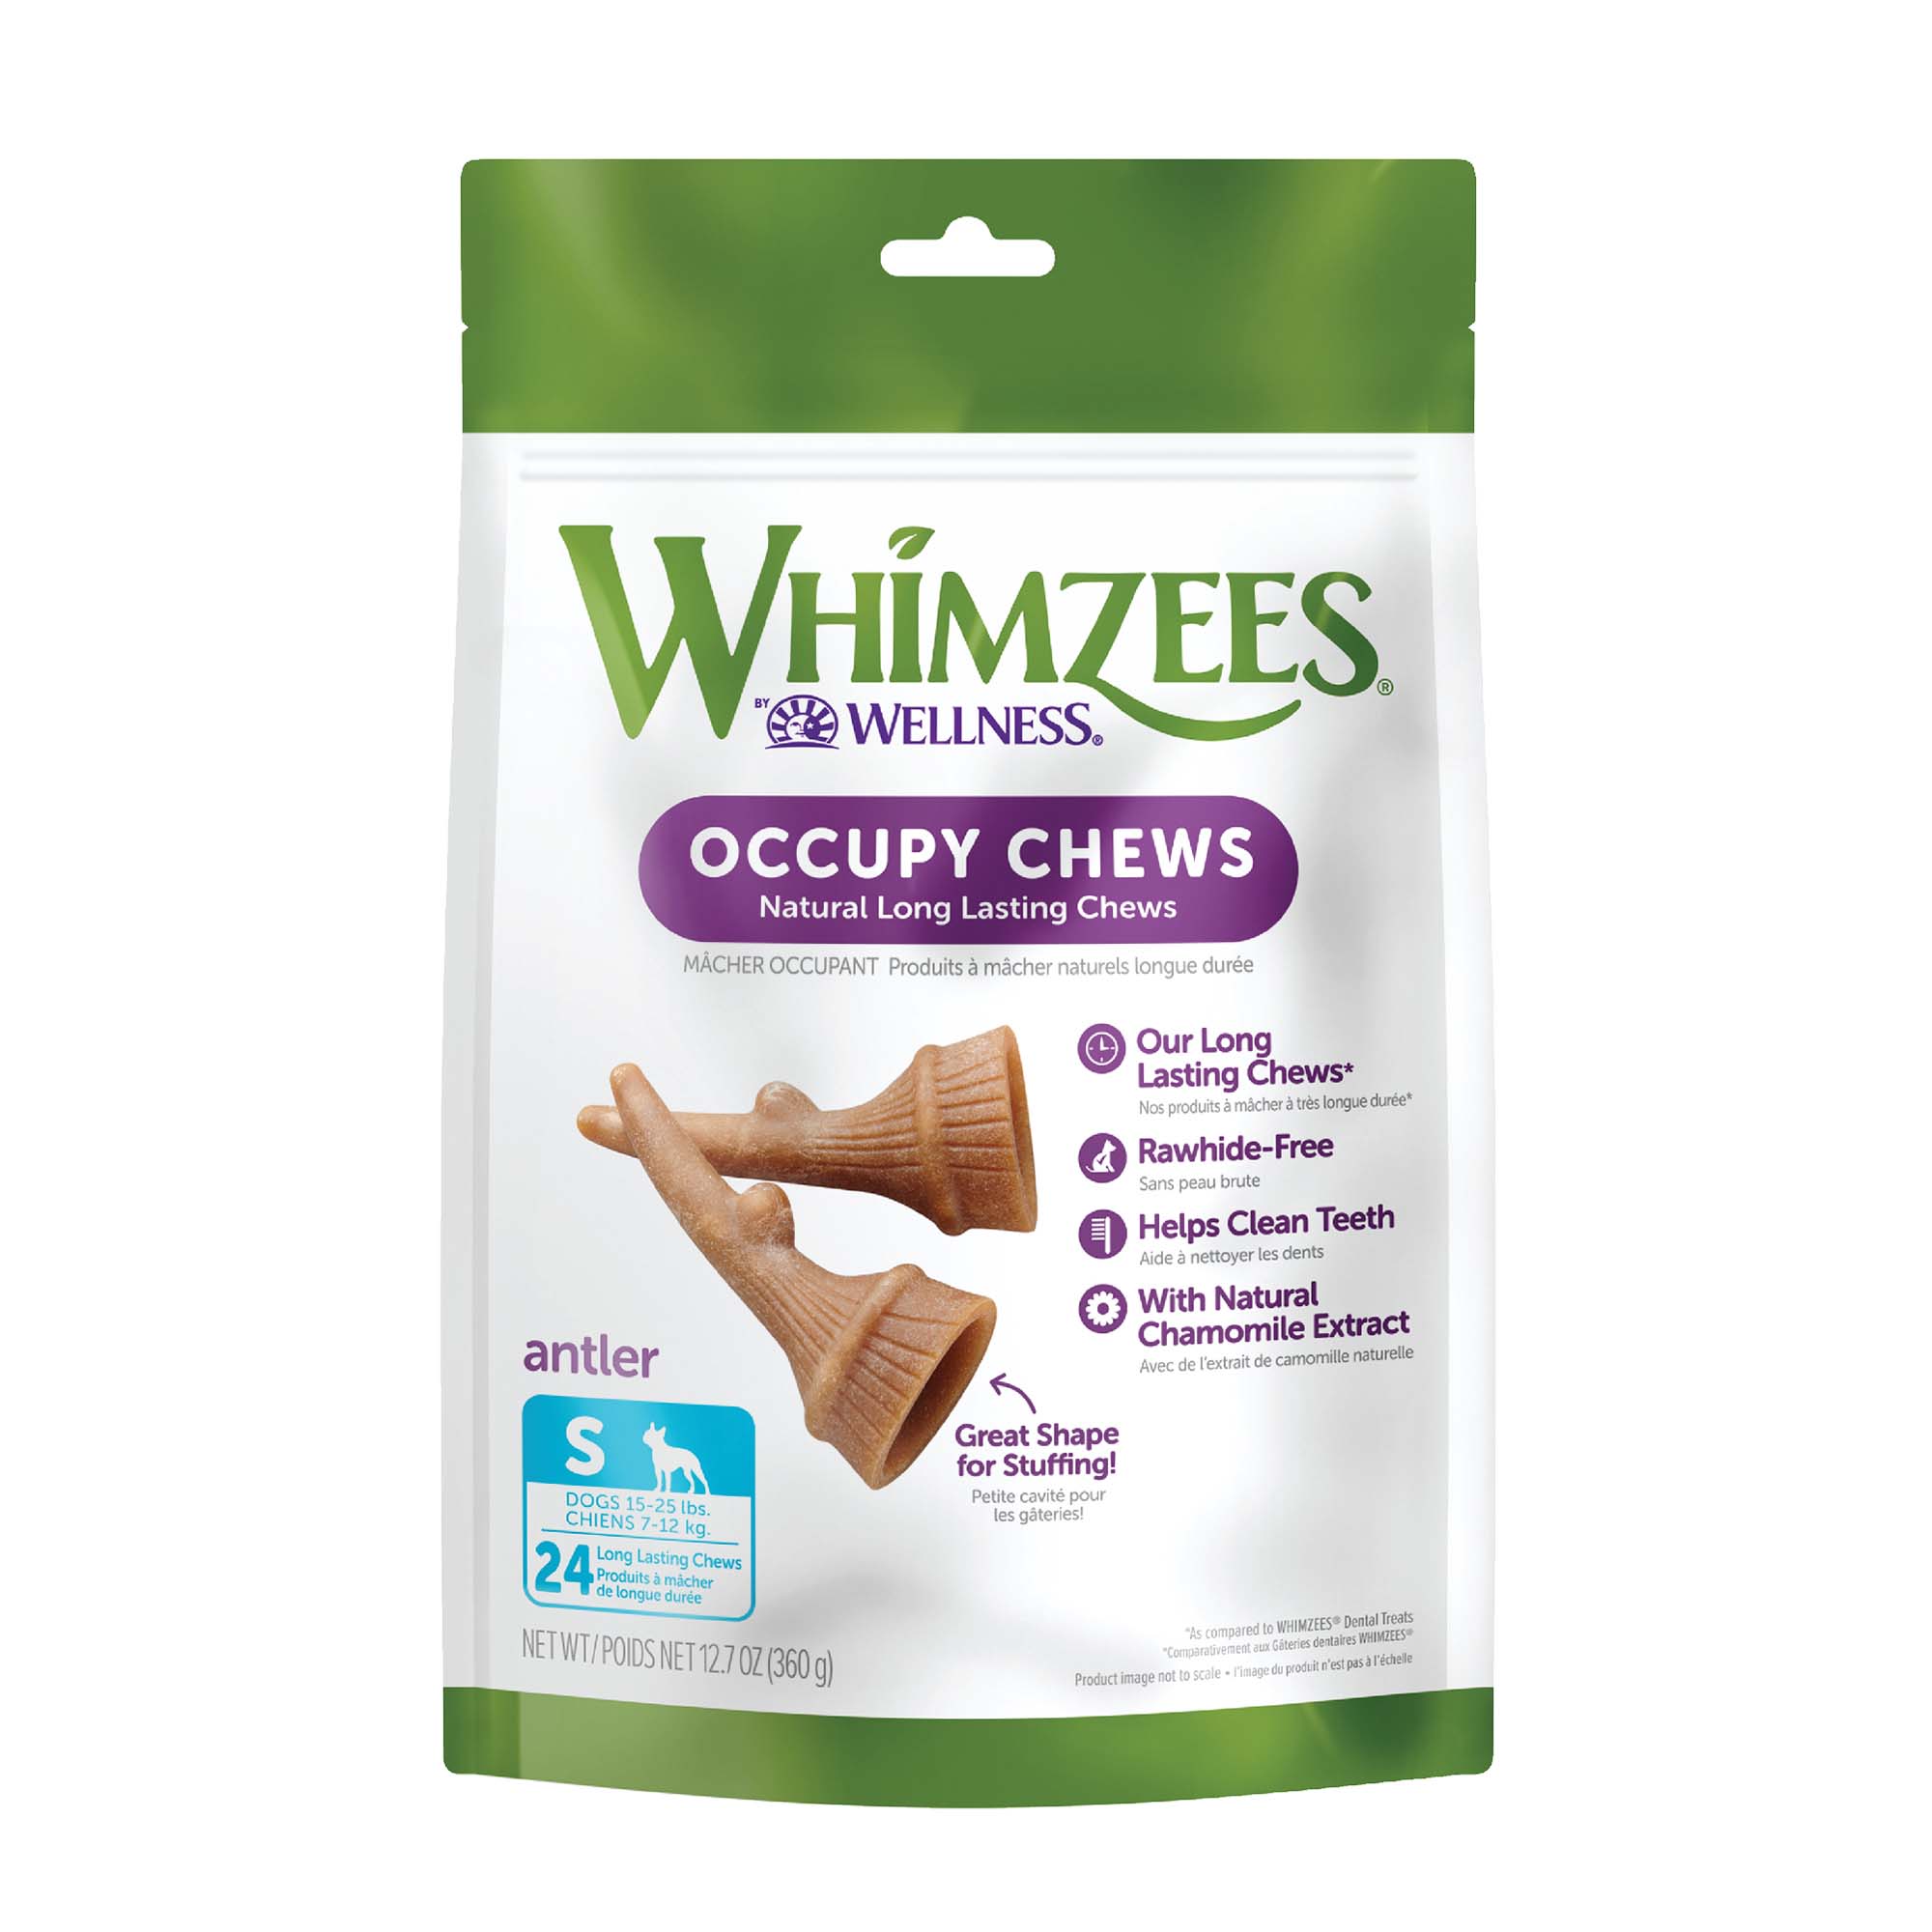 WHIMZEES Value Bags Antler Product